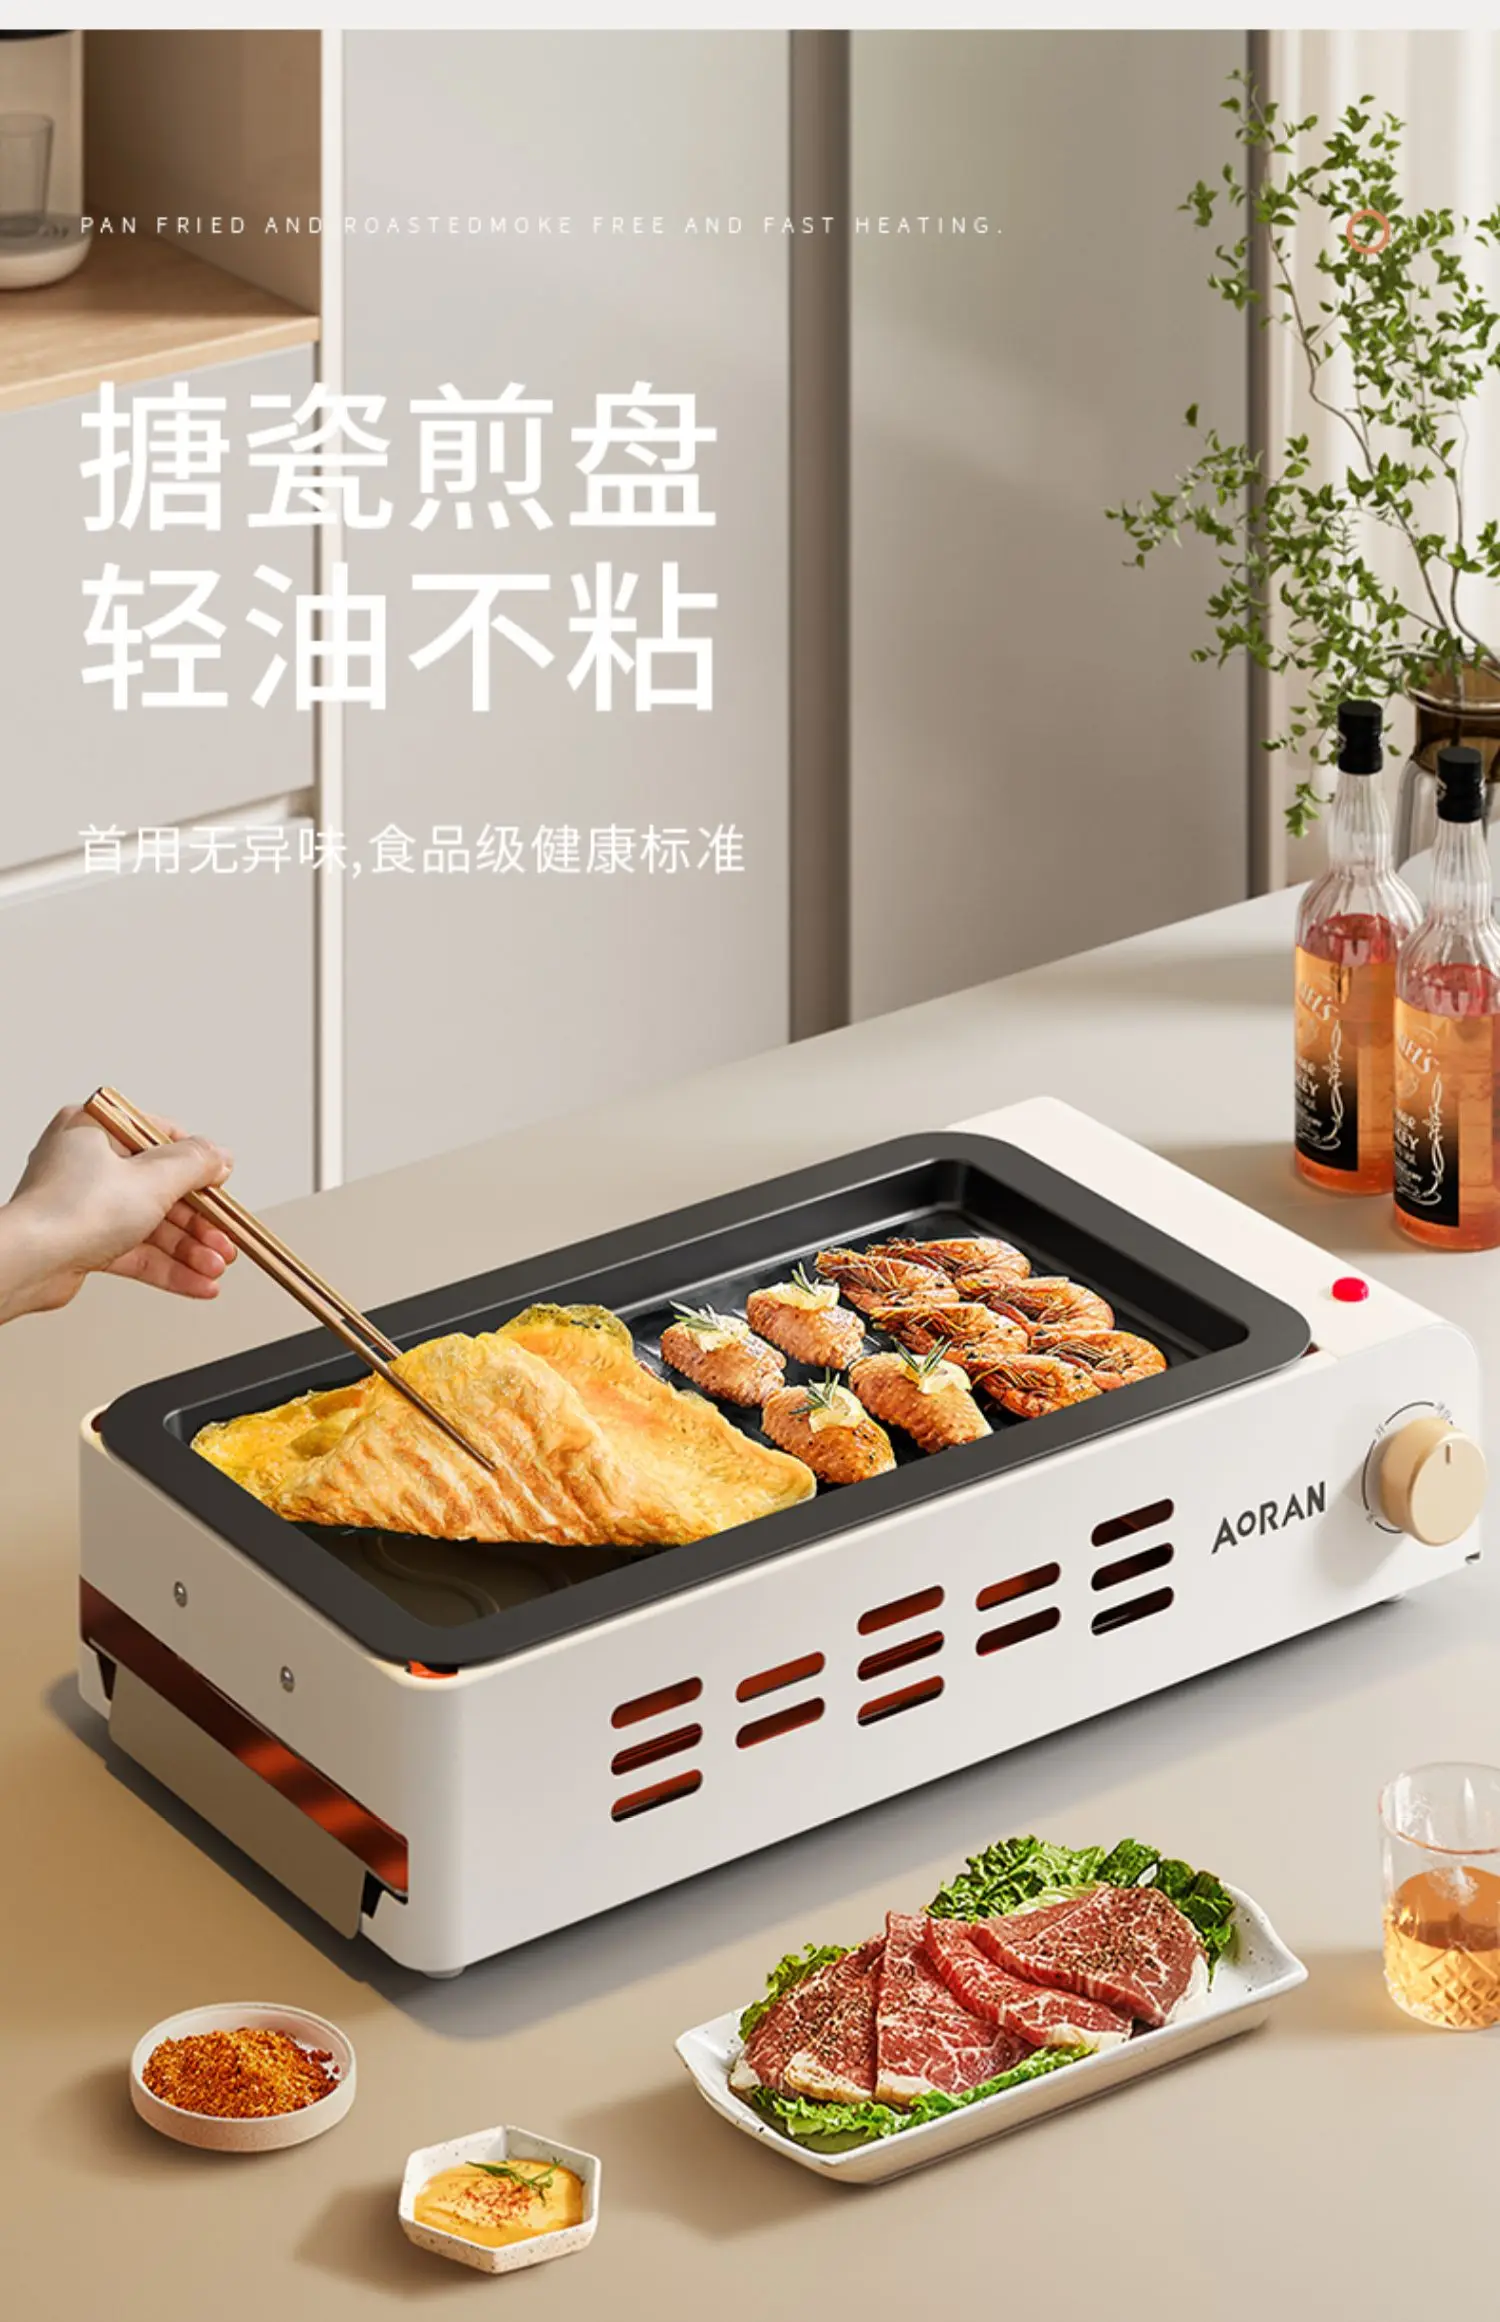 Household Electric Grill Smokless Indoor Grill Pan Barbecue Stove One Pot электро гриль для кухни grelhador eletrico